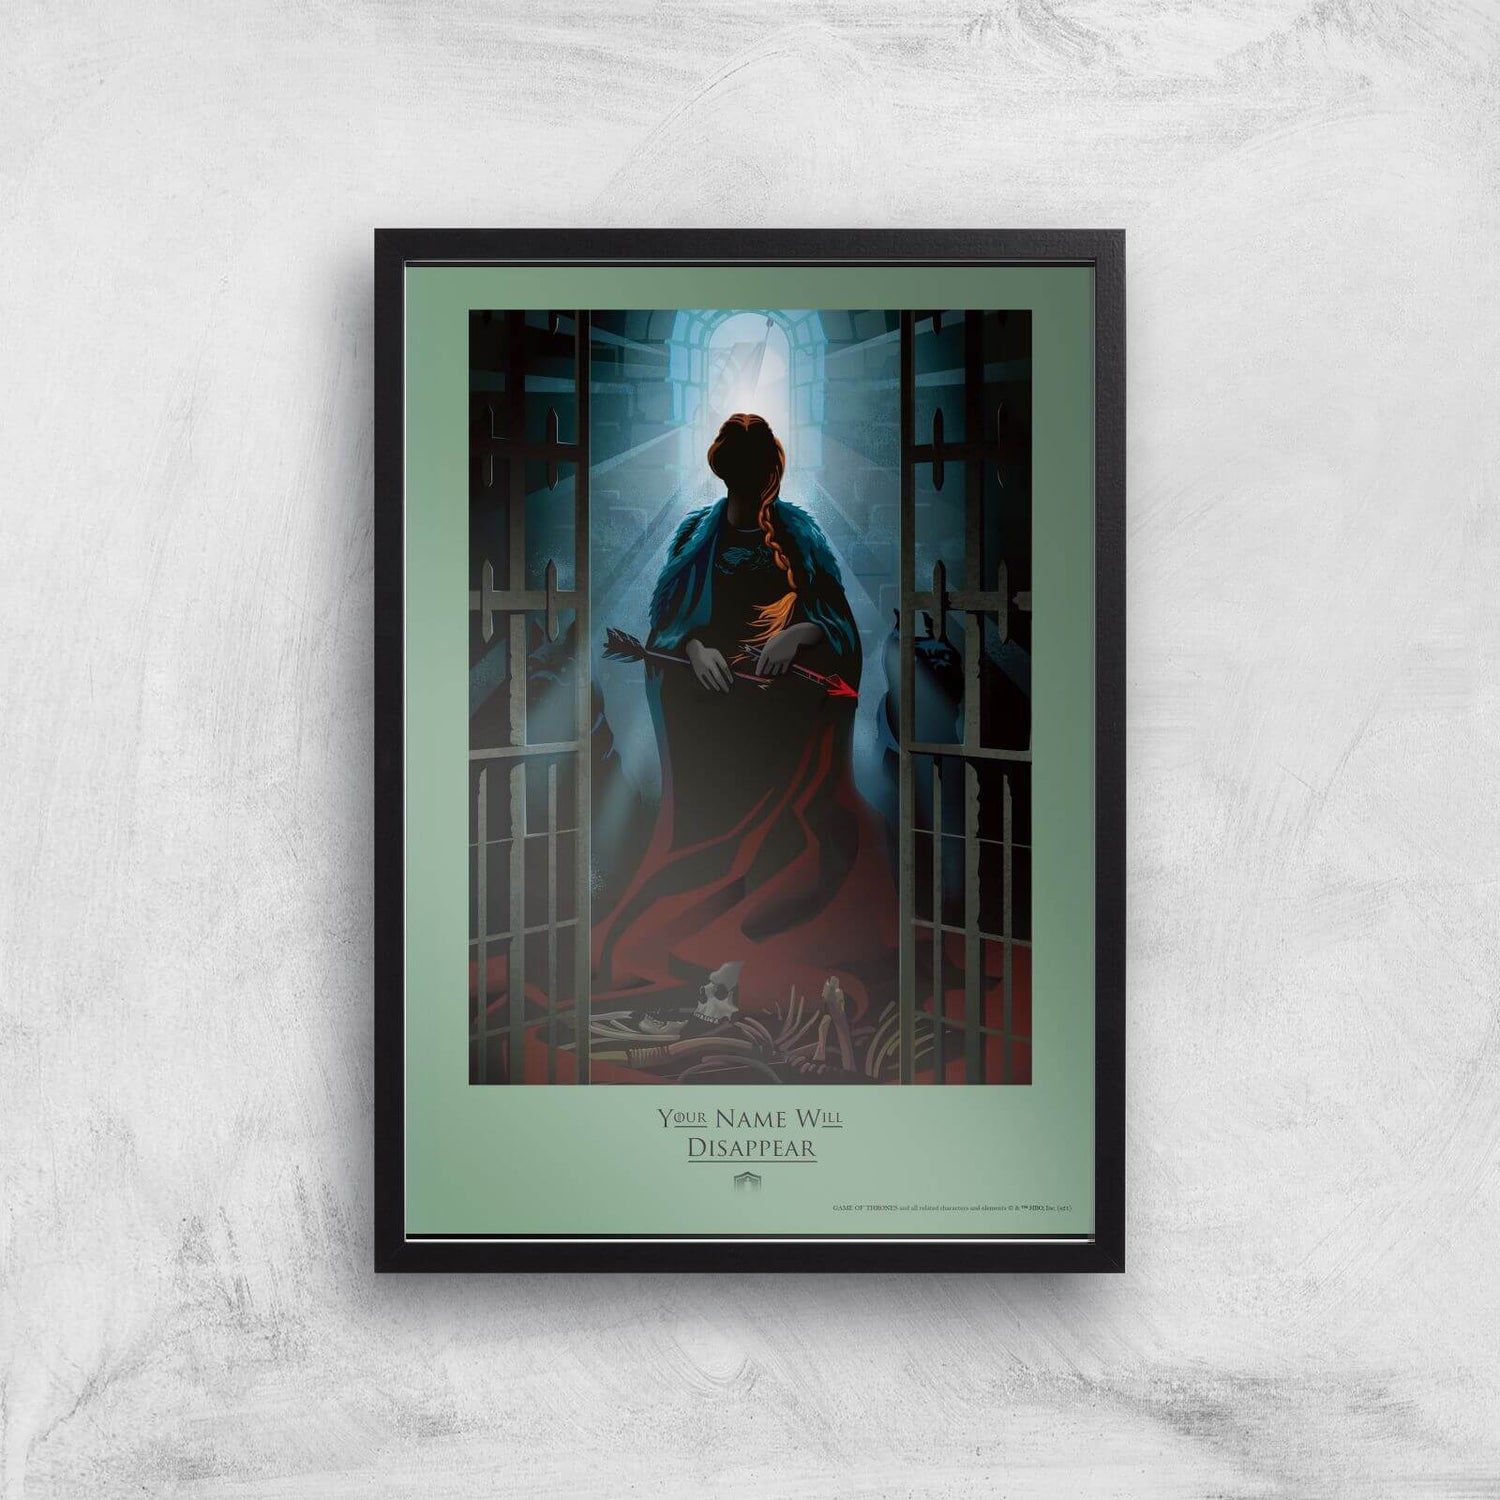 Game of Thrones Disappear Giclee Art Print